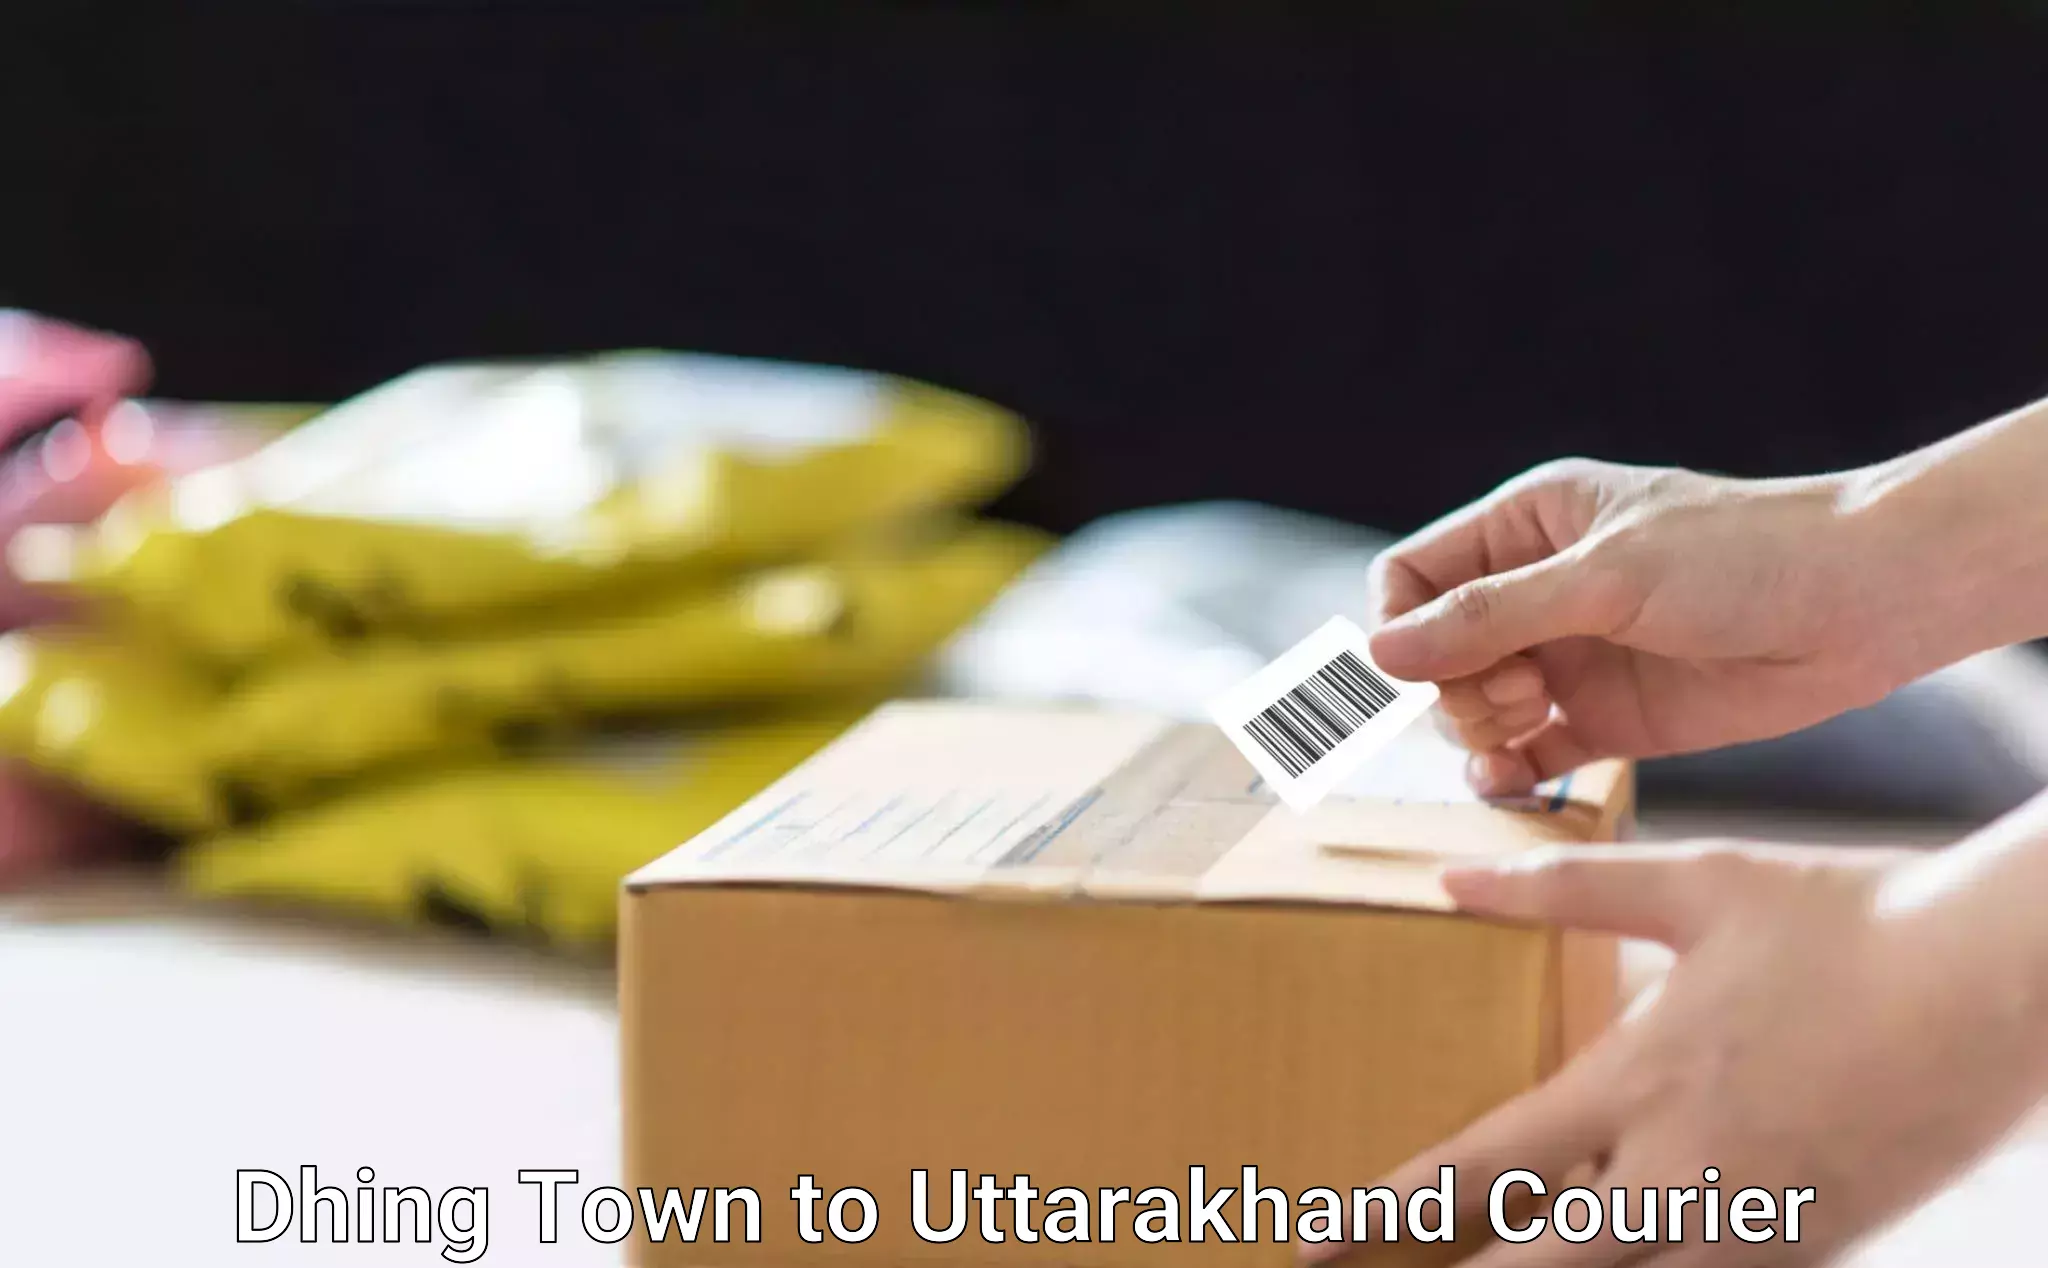 Efficient order fulfillment Dhing Town to Lansdowne